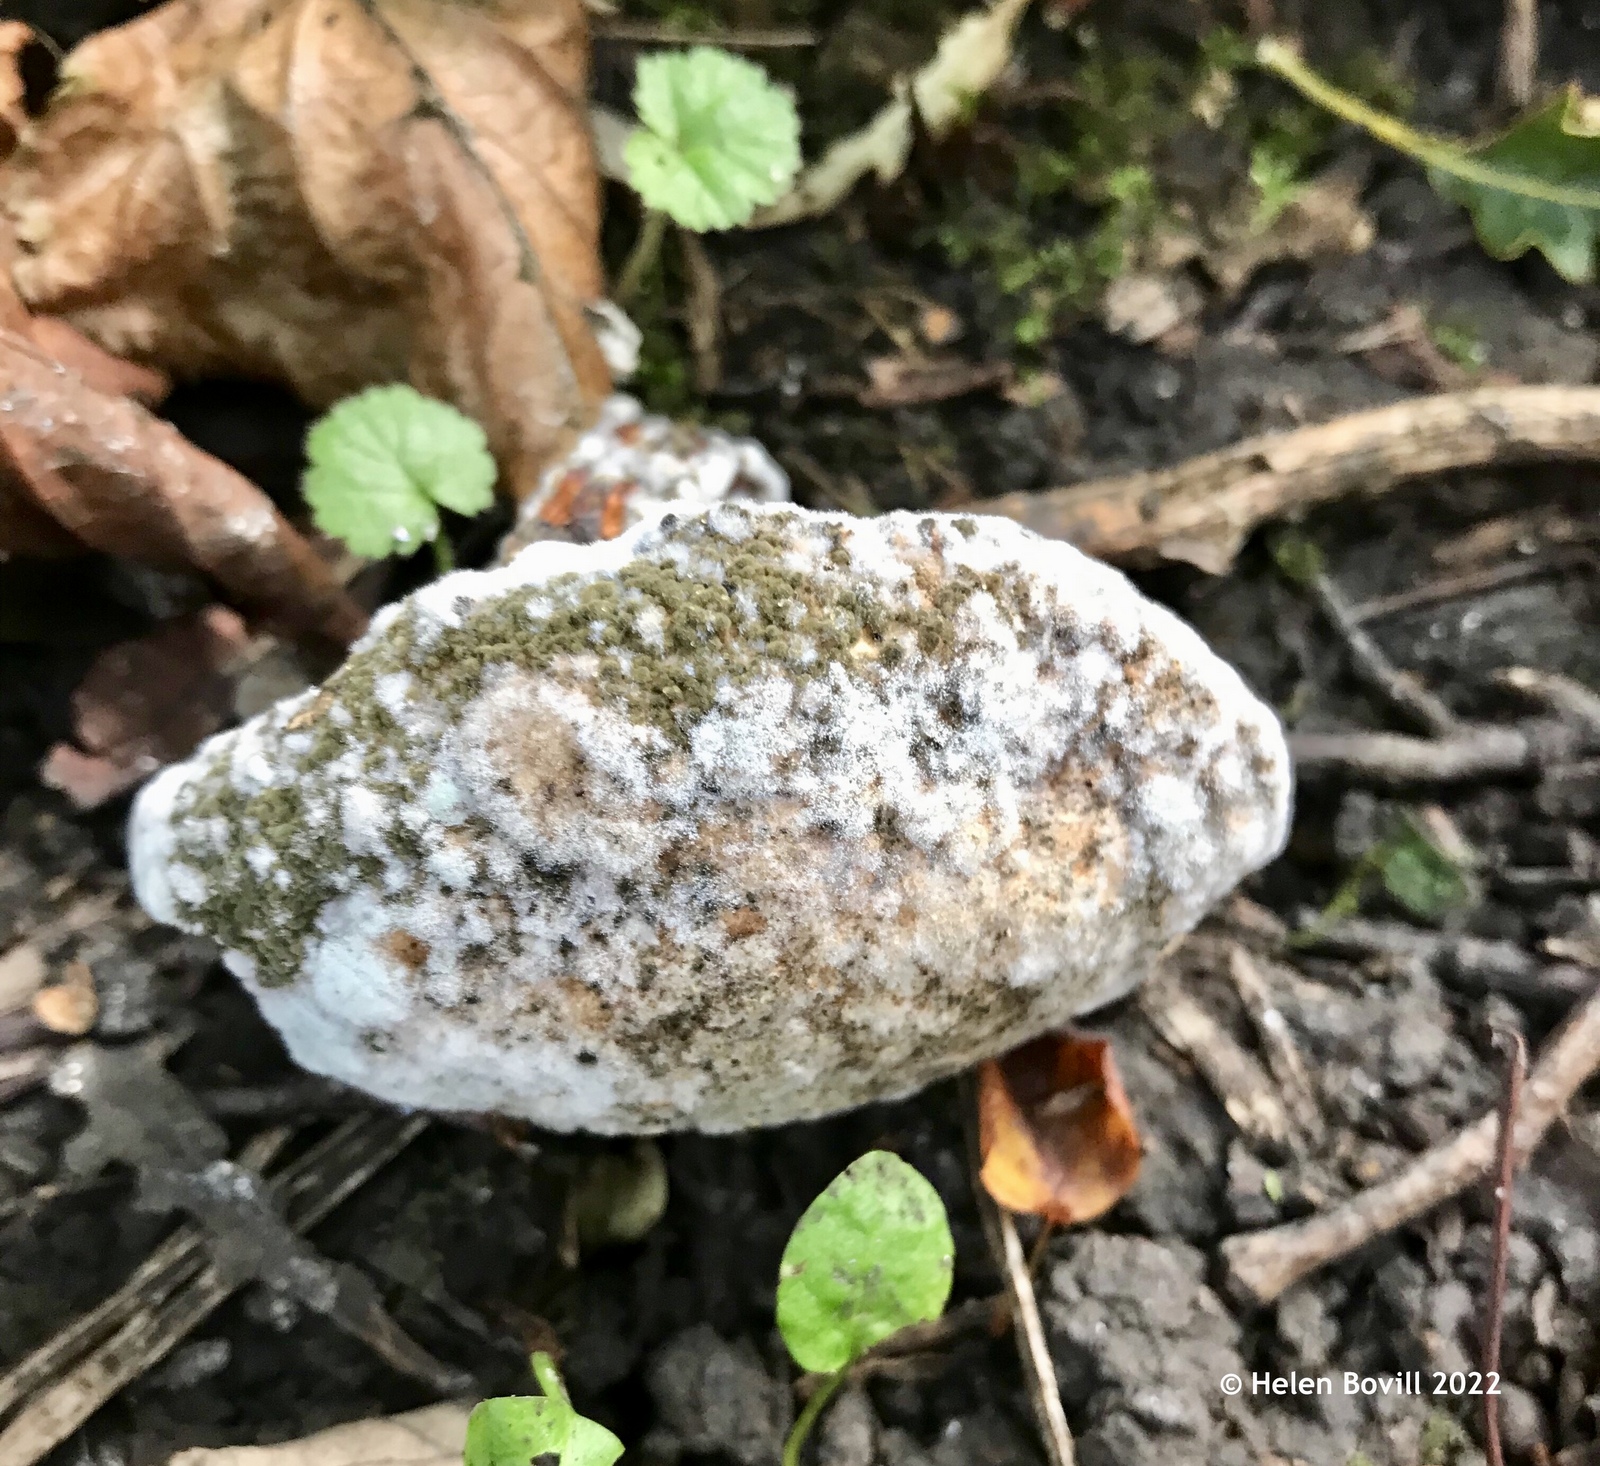 A shrivelled mushroom with fungi on it in the cemetery